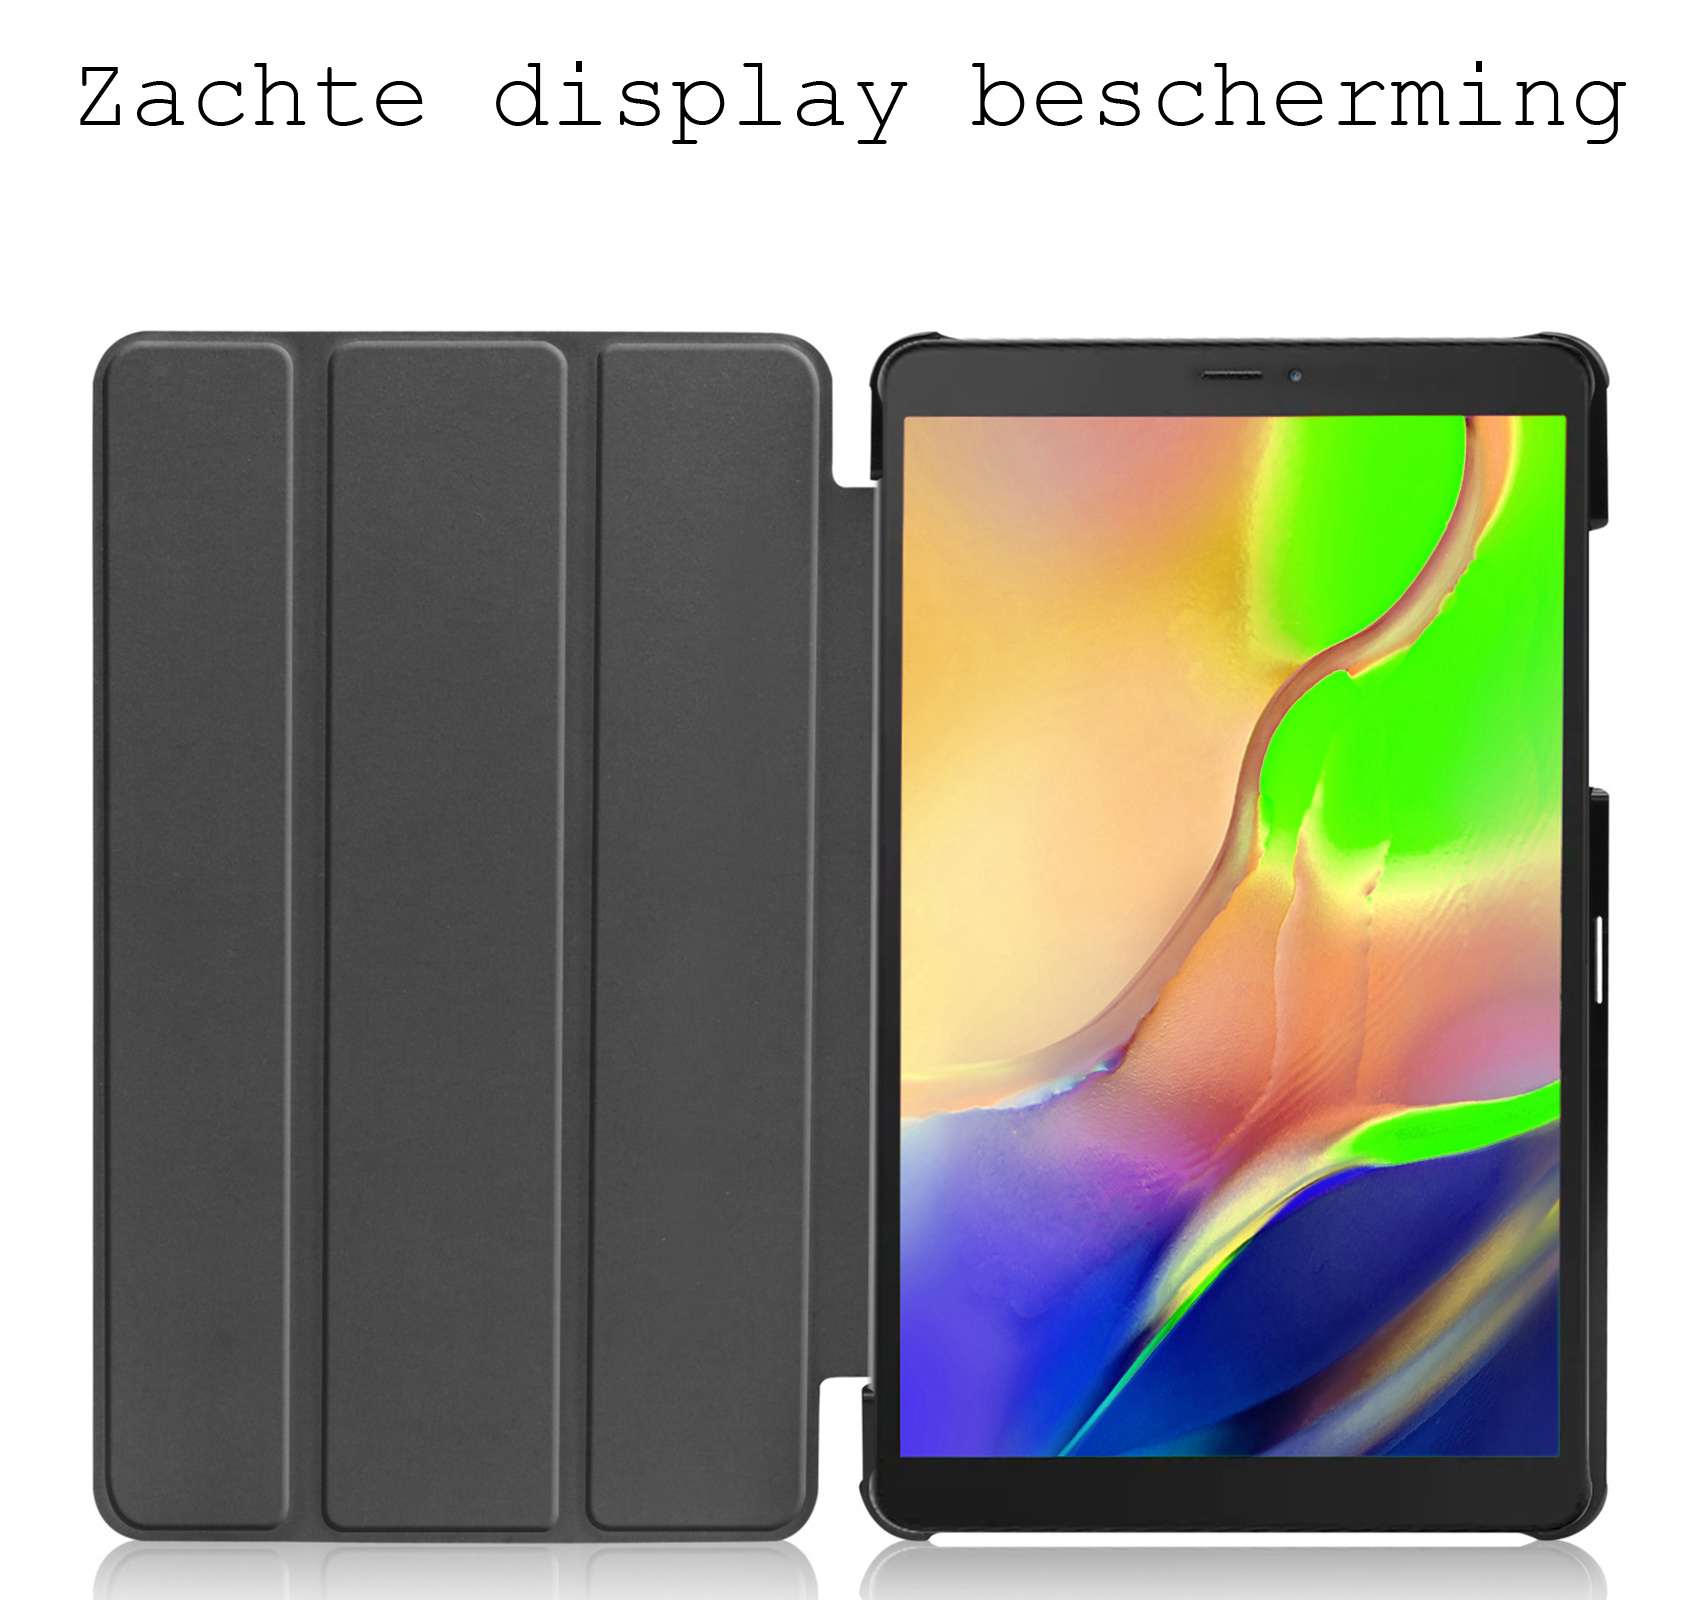 BASEY. Samsung Galaxy Tab A 8.0 2019 Hoes Book Case Luxe Hoesje Met Screenprotector - Samsung Galaxy Tab A 8.0 (2019) Hoesje Book Case Hoes - Lichtblauw